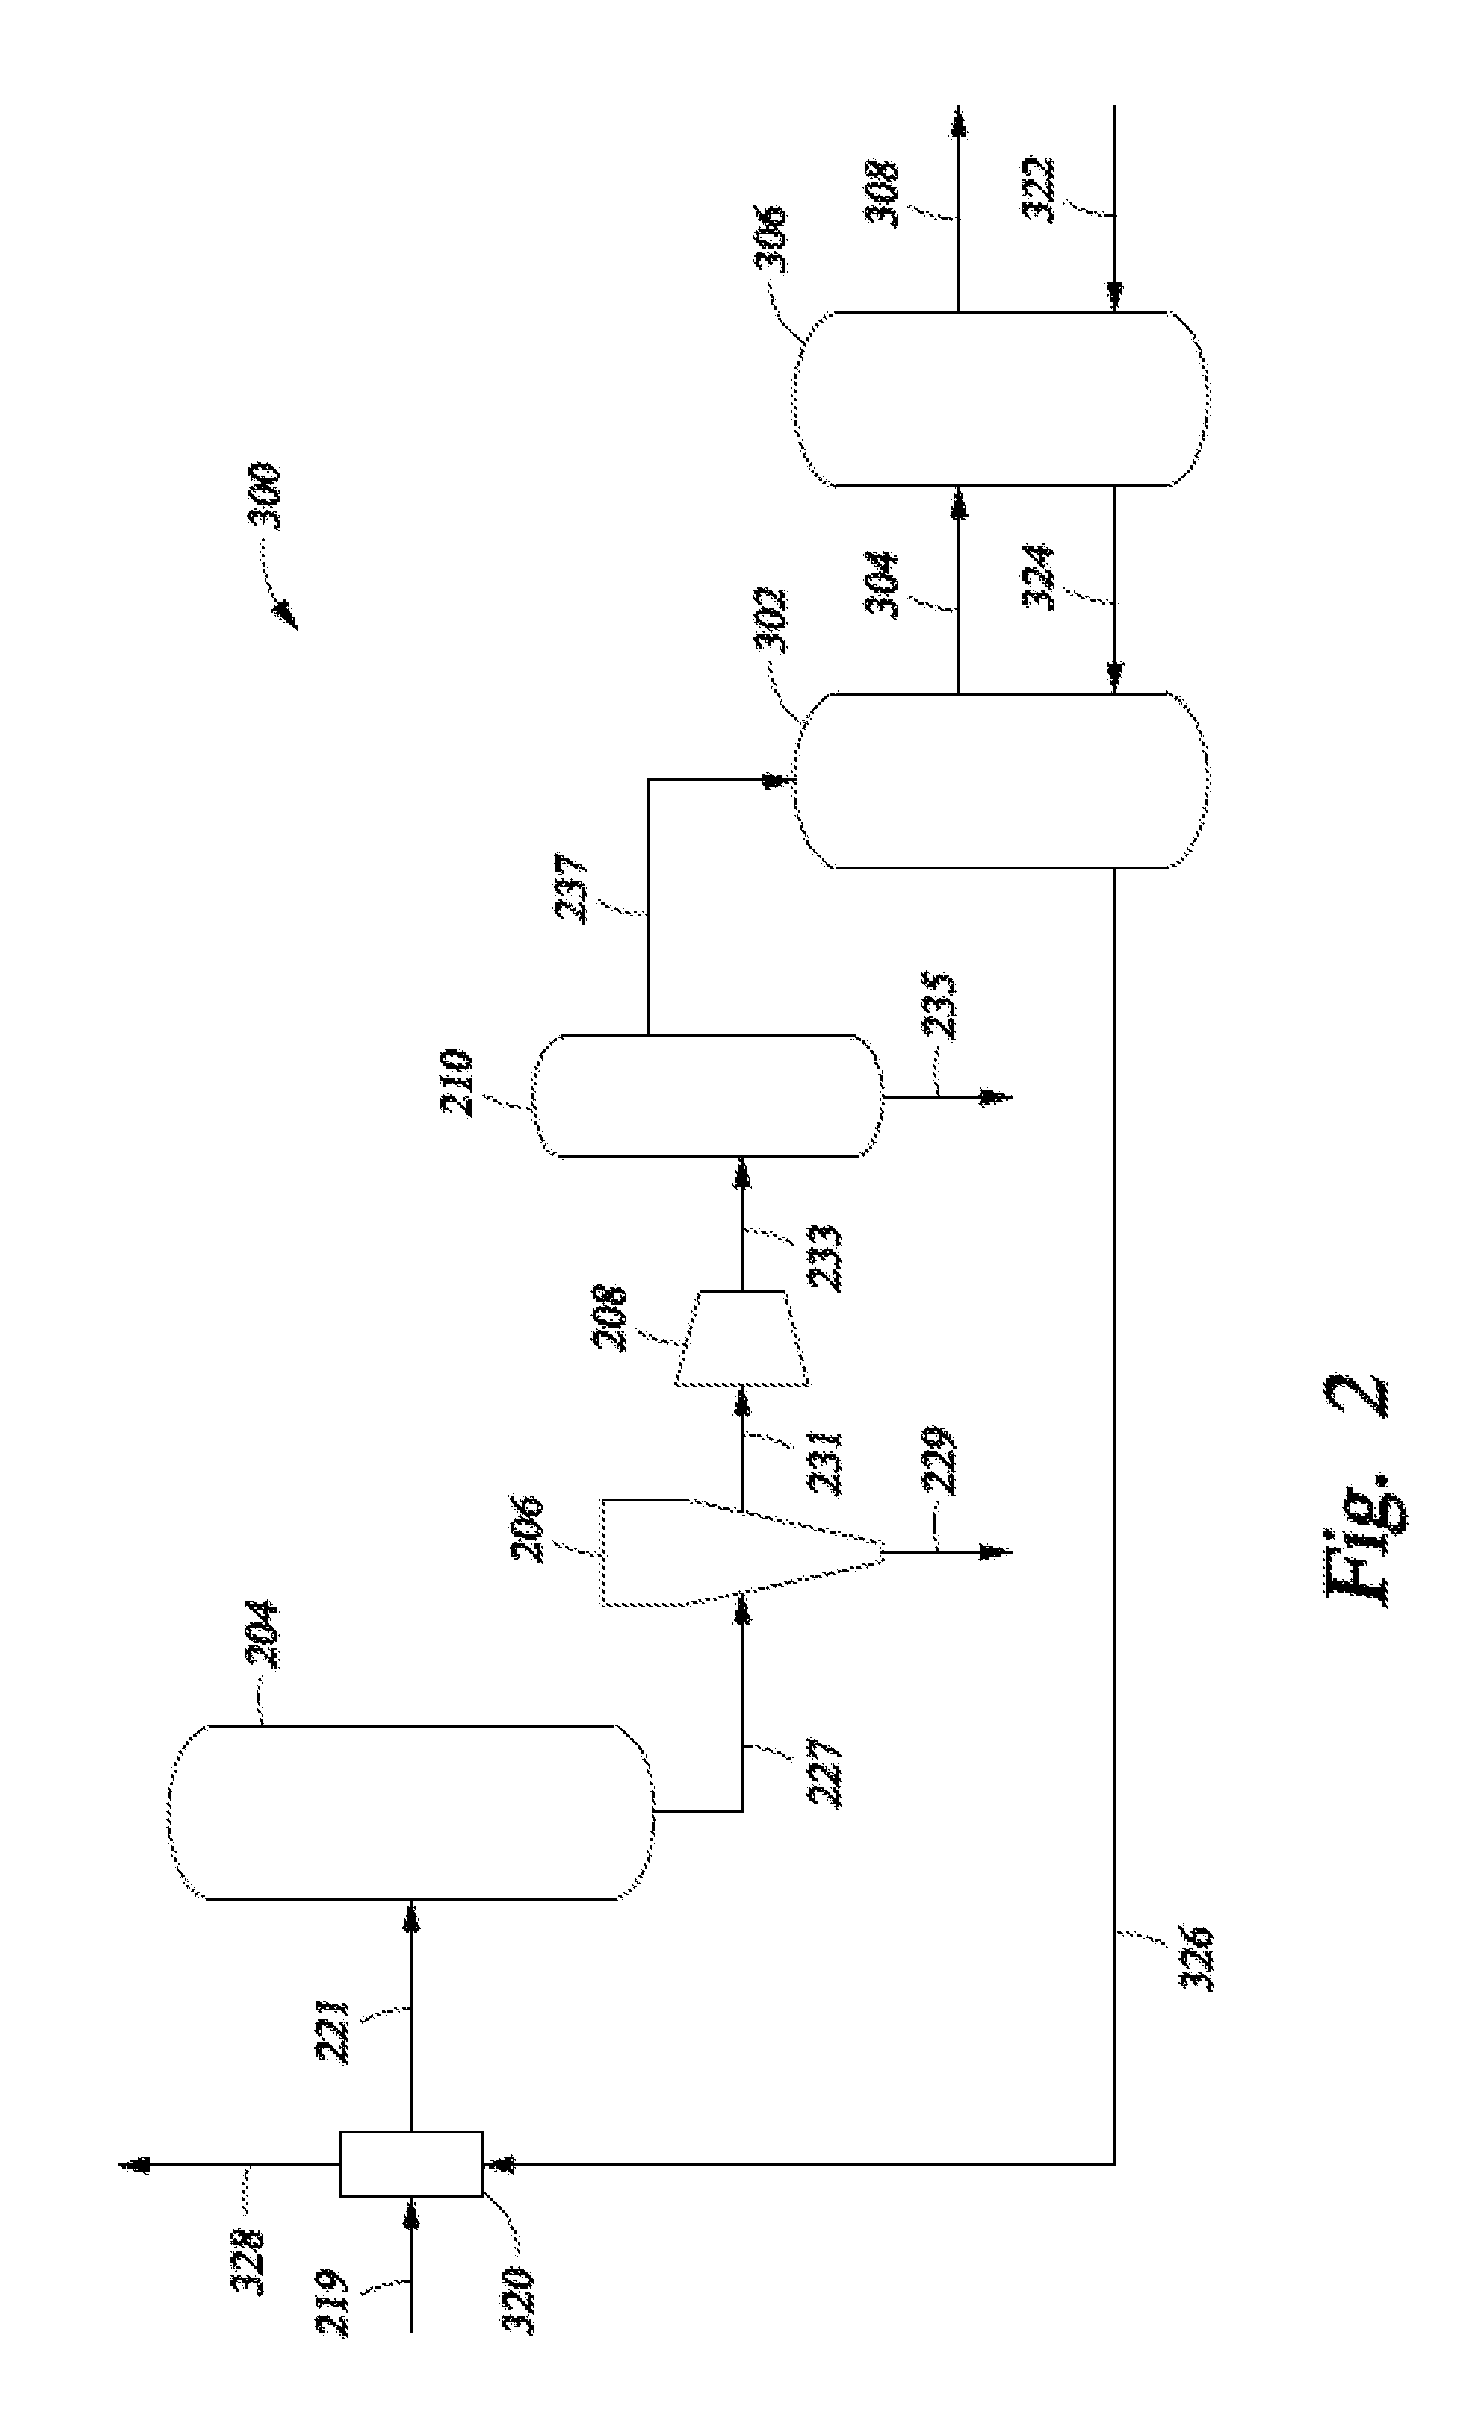 Selective Hydrogenation of Alkynyl-Containing Compounds